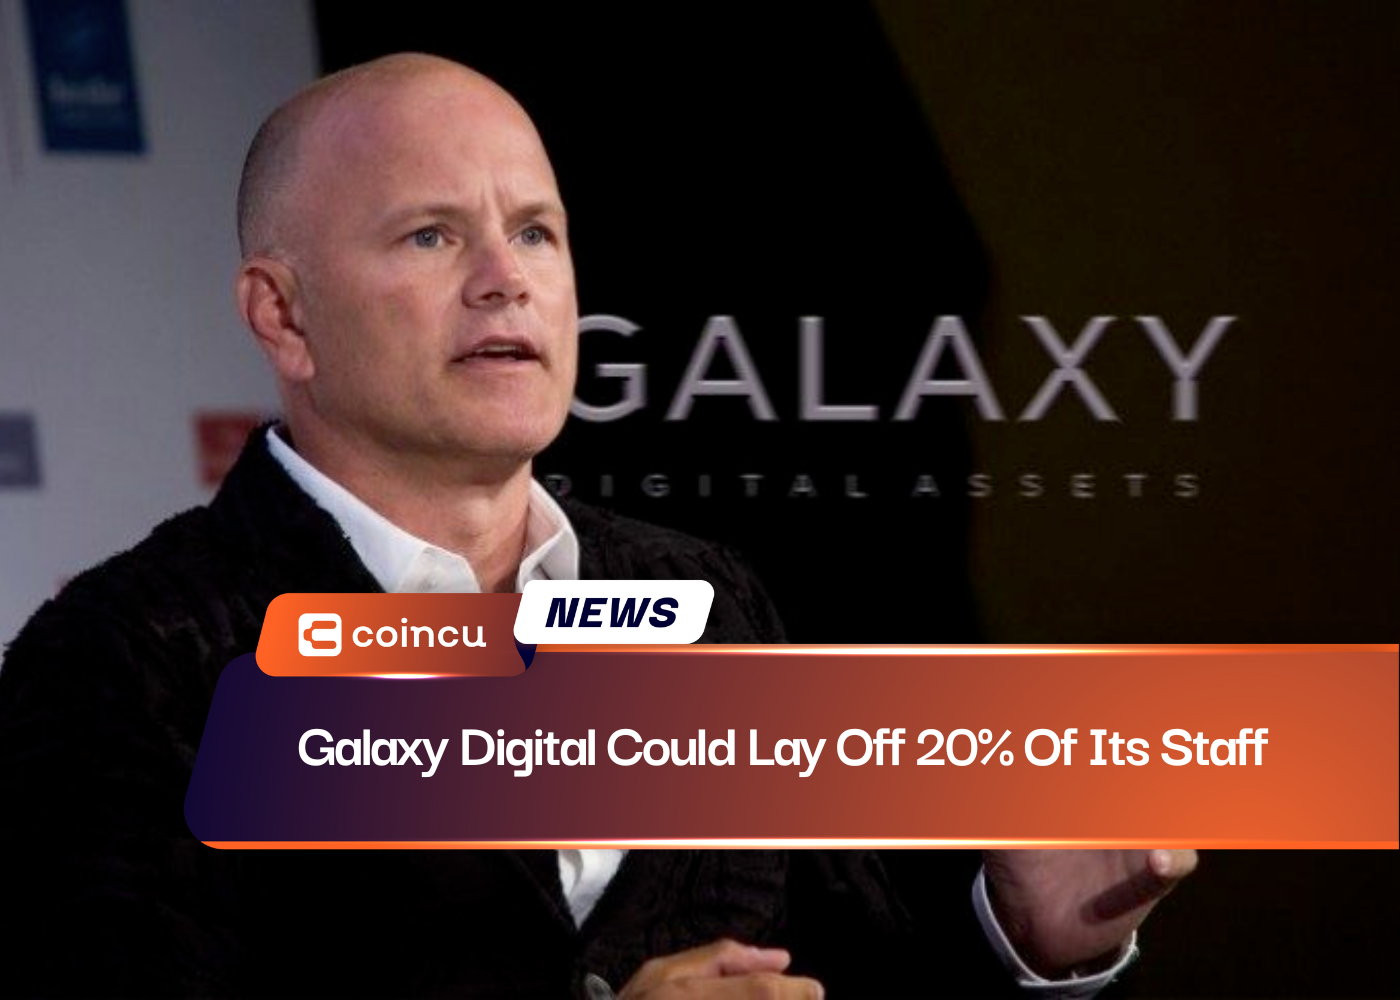 Galaxy Digital Could Lay Off 20% Of Its Staff